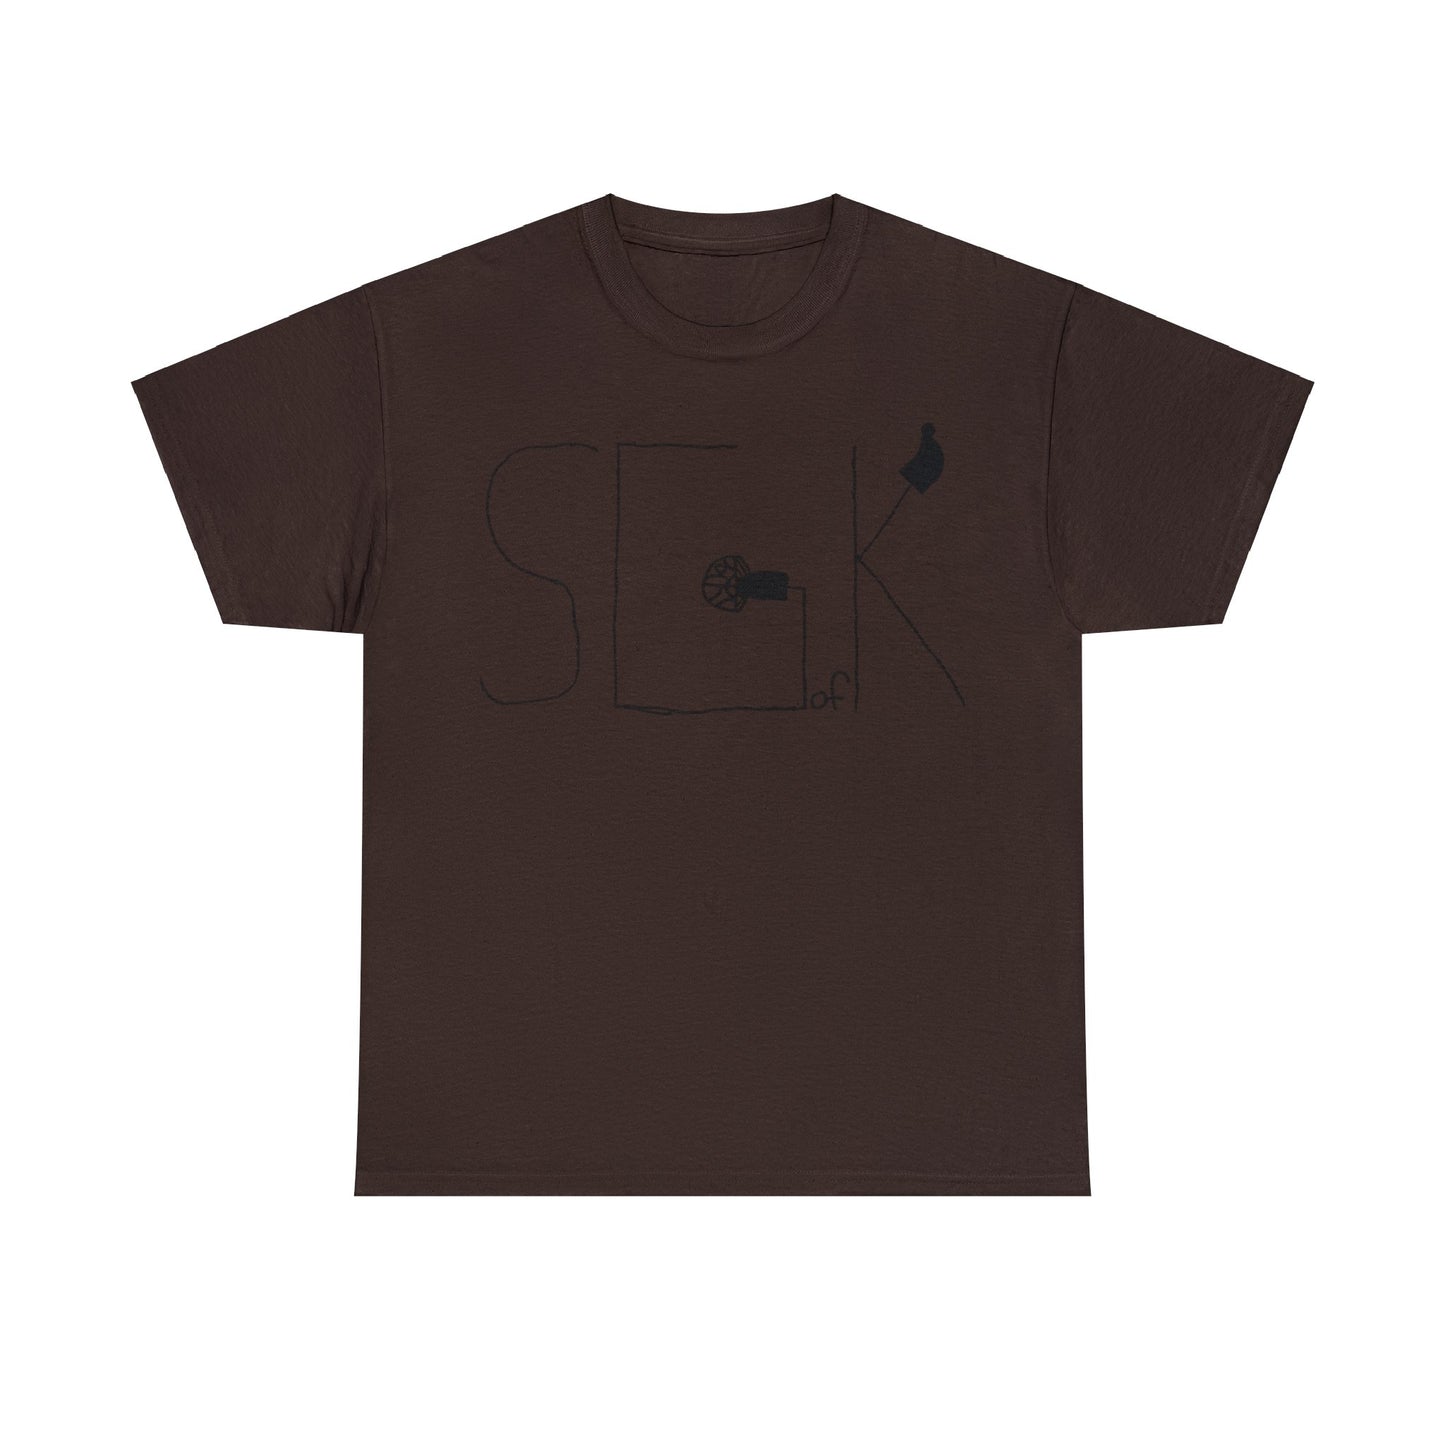 SGK TheCryptoSpyder's Daughter's Drawing Front Unisex Heavy Cotton Tee